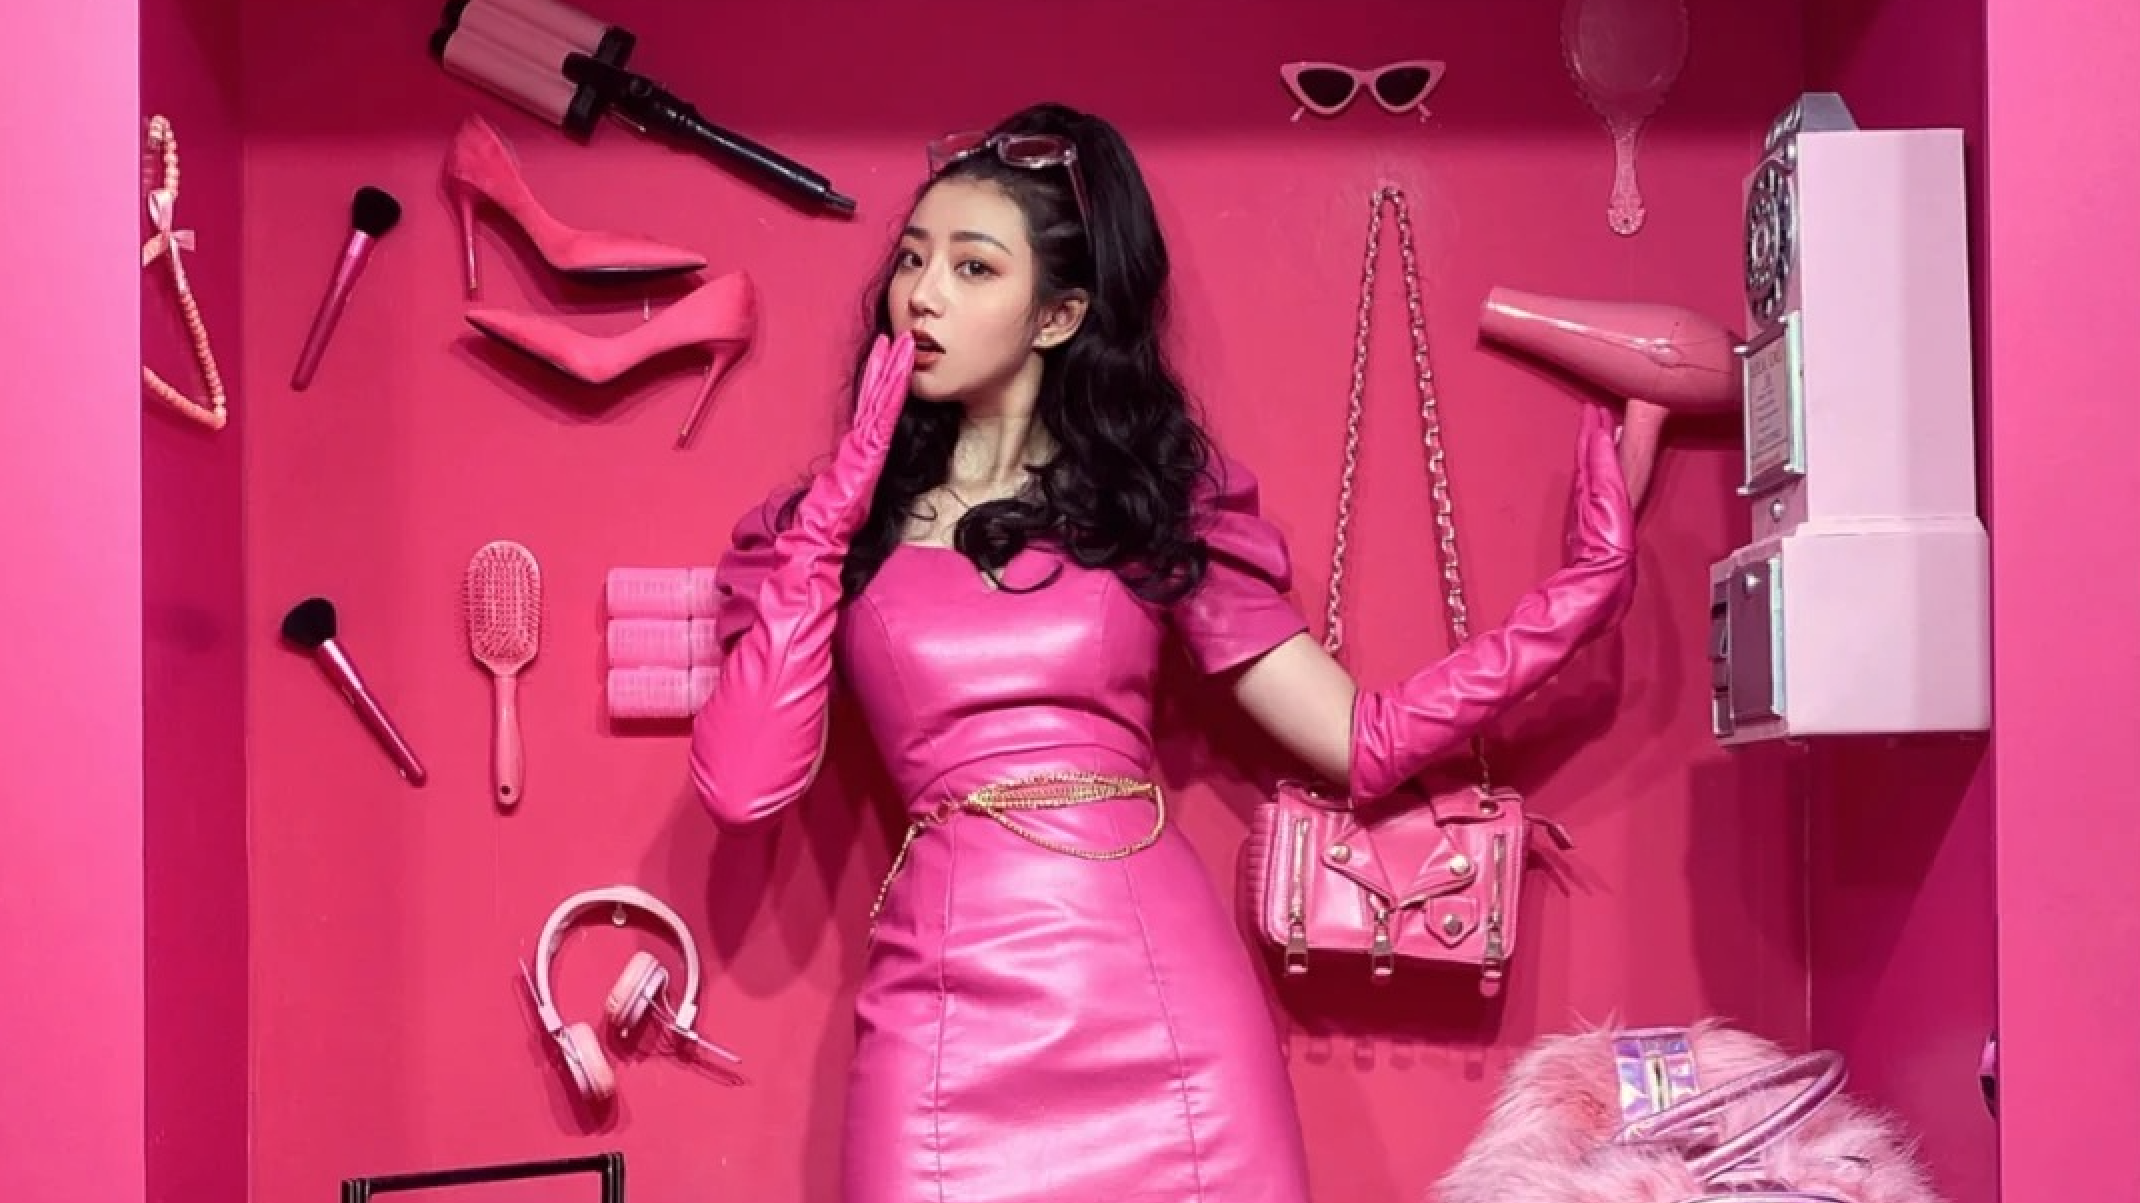 Pretty in pink: What China’s Barbie-mania tells us about the nation’s rising ‘she economy’